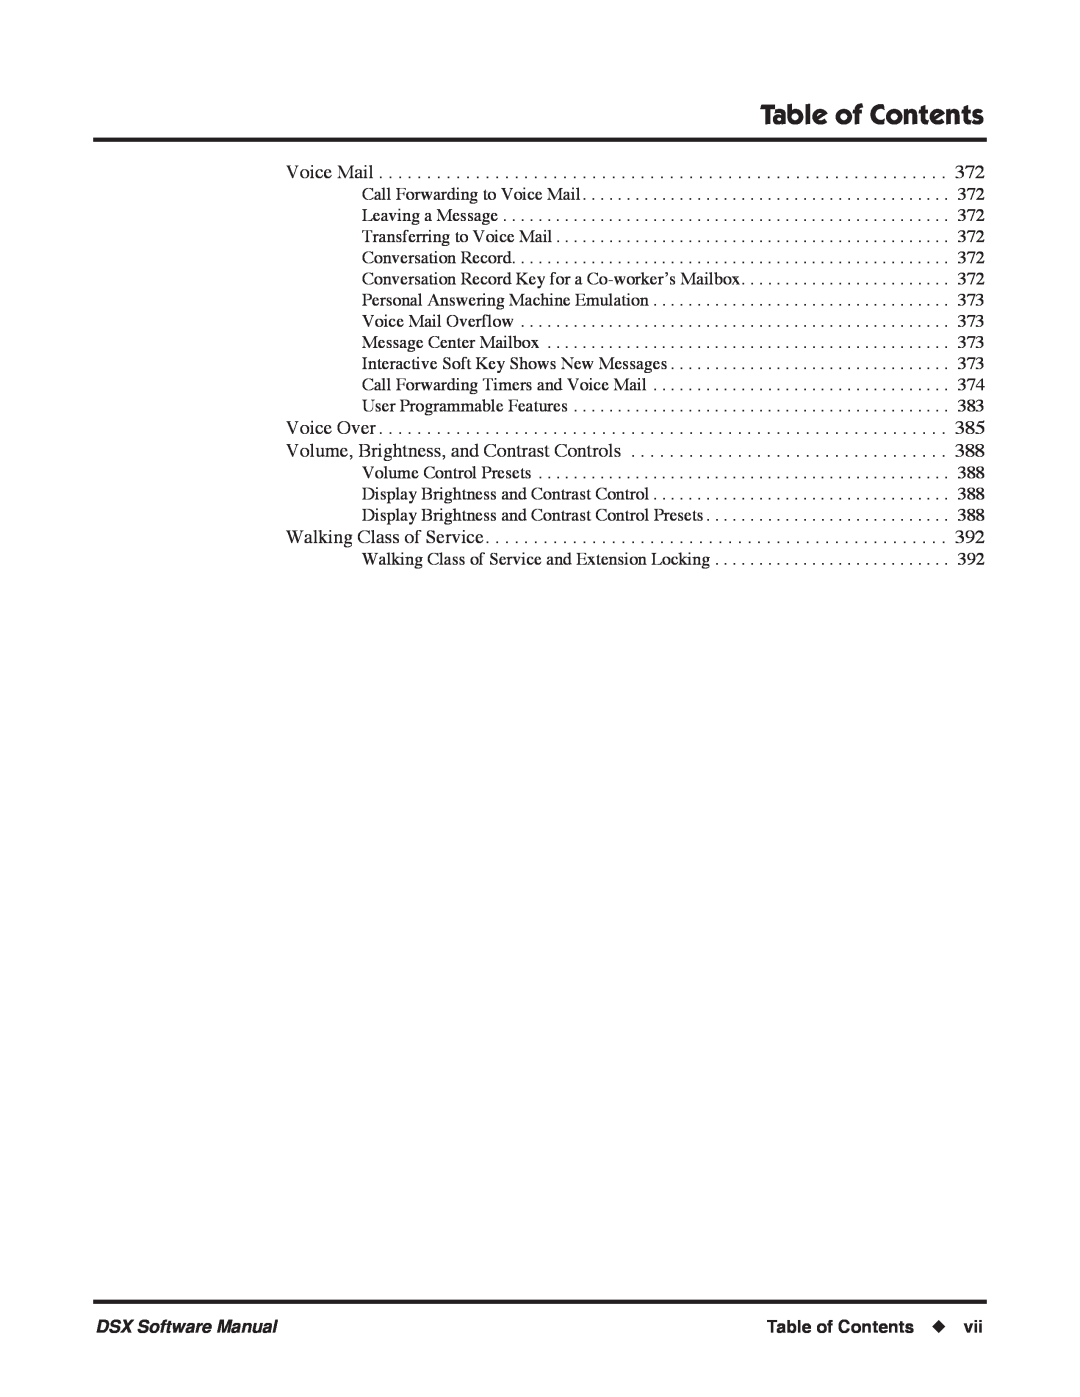 NEC P, N 1093100 software manual Table of Contents, Voice Mail 